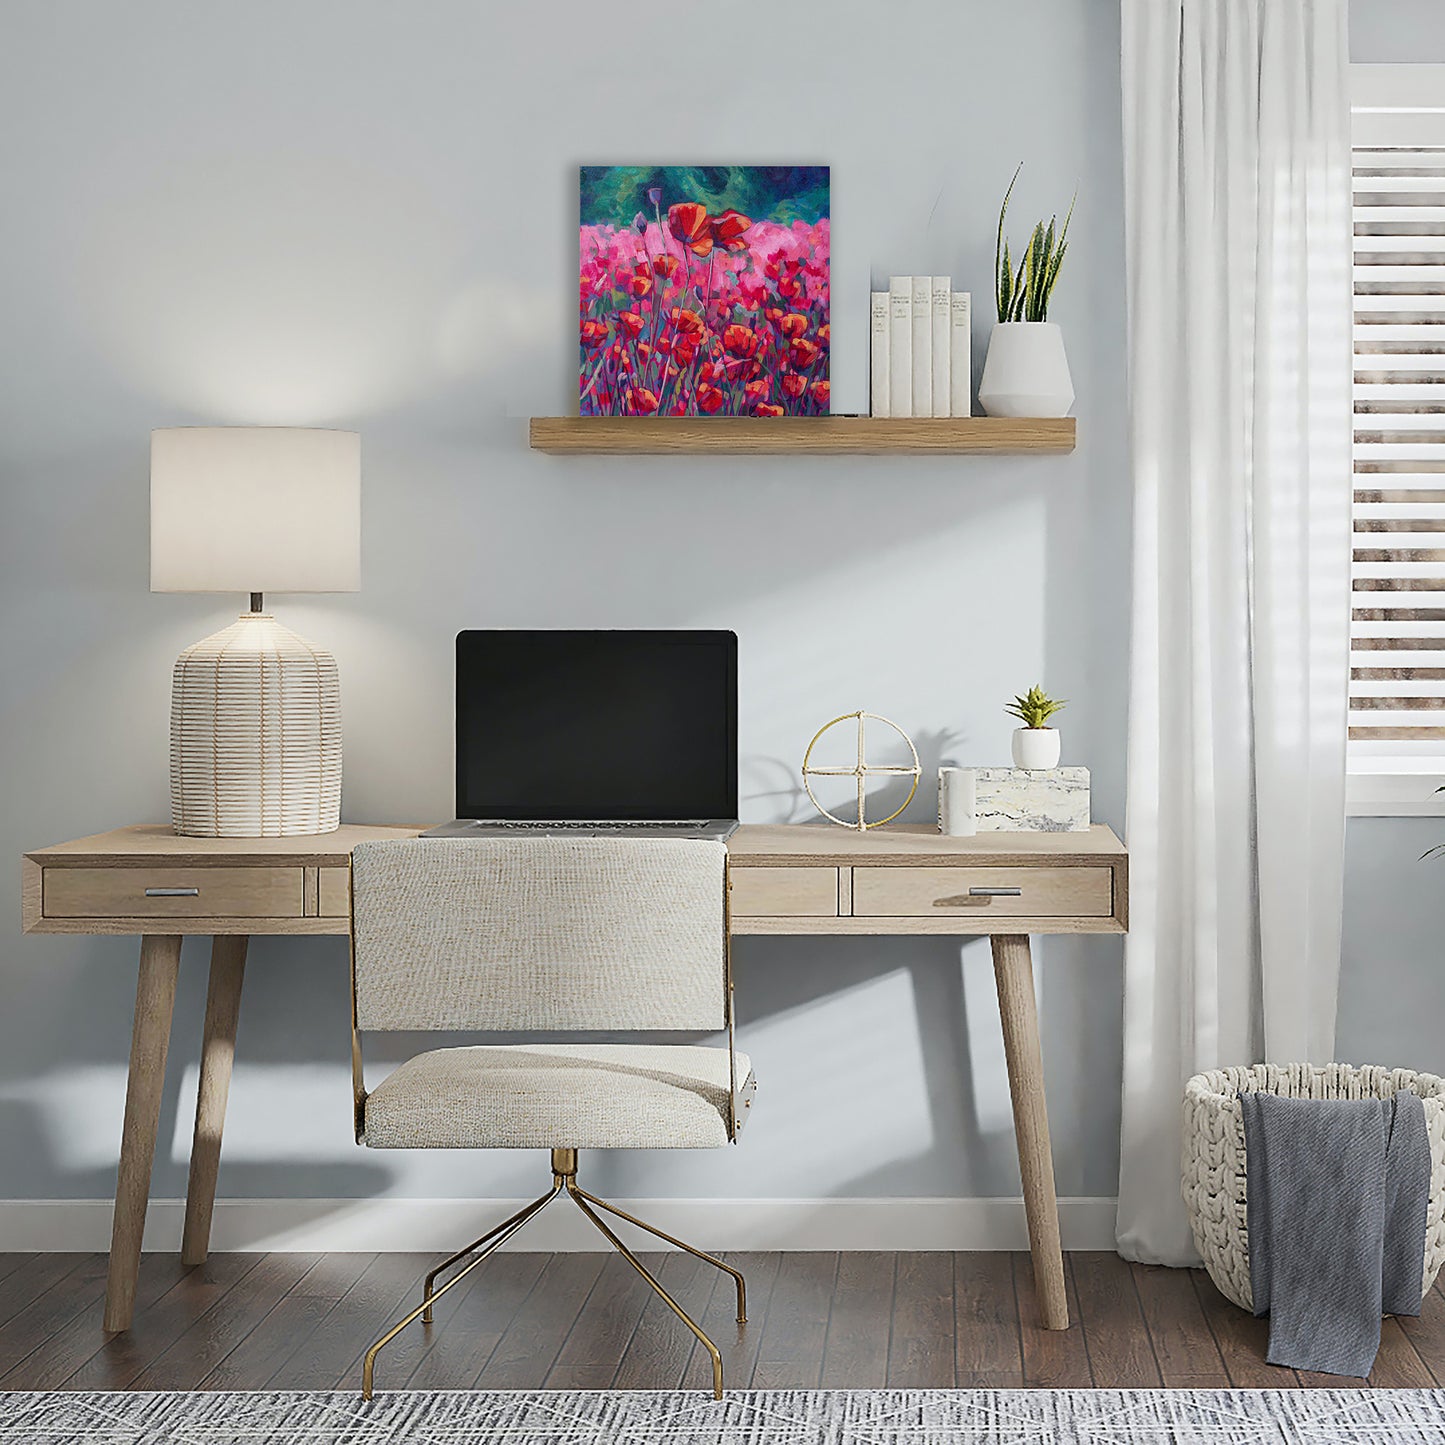 Poppy painting in neutral home office